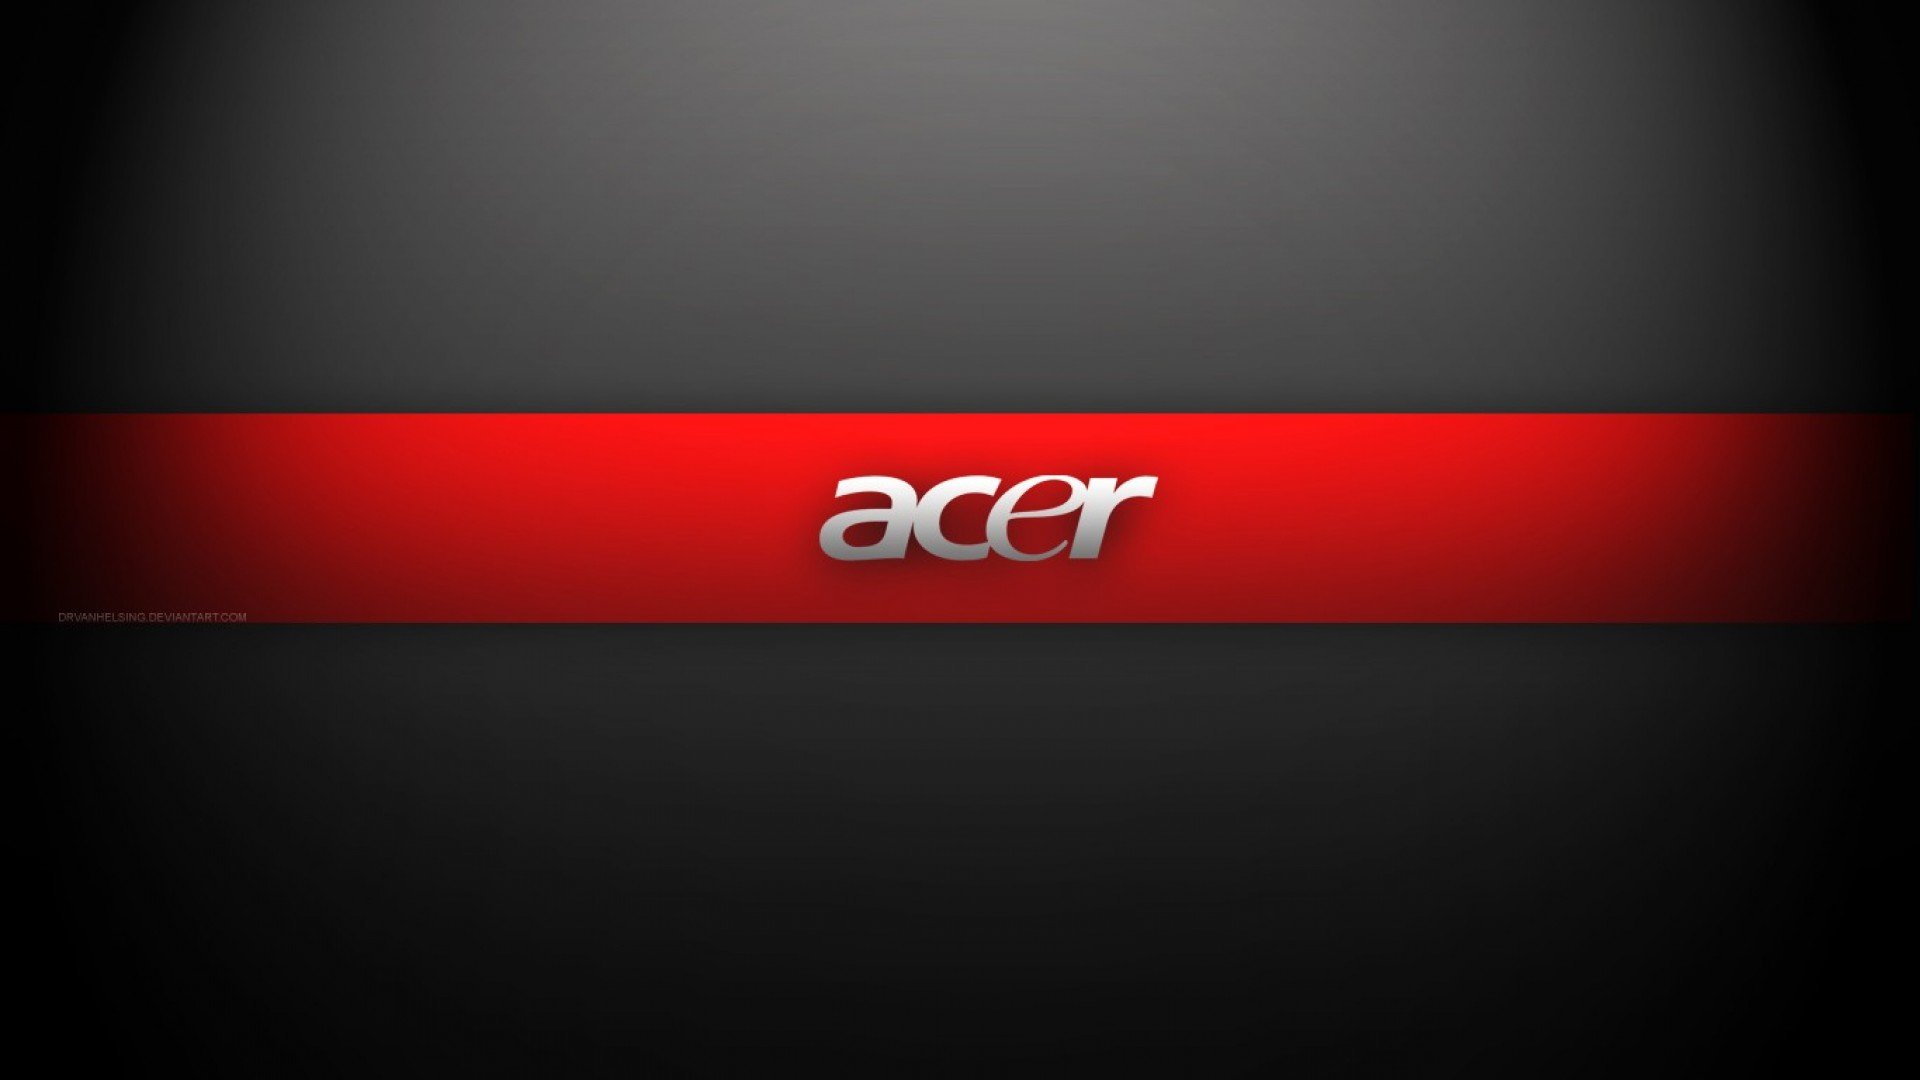 Acer computer wallpapers hd desktop and mobile backgrounds